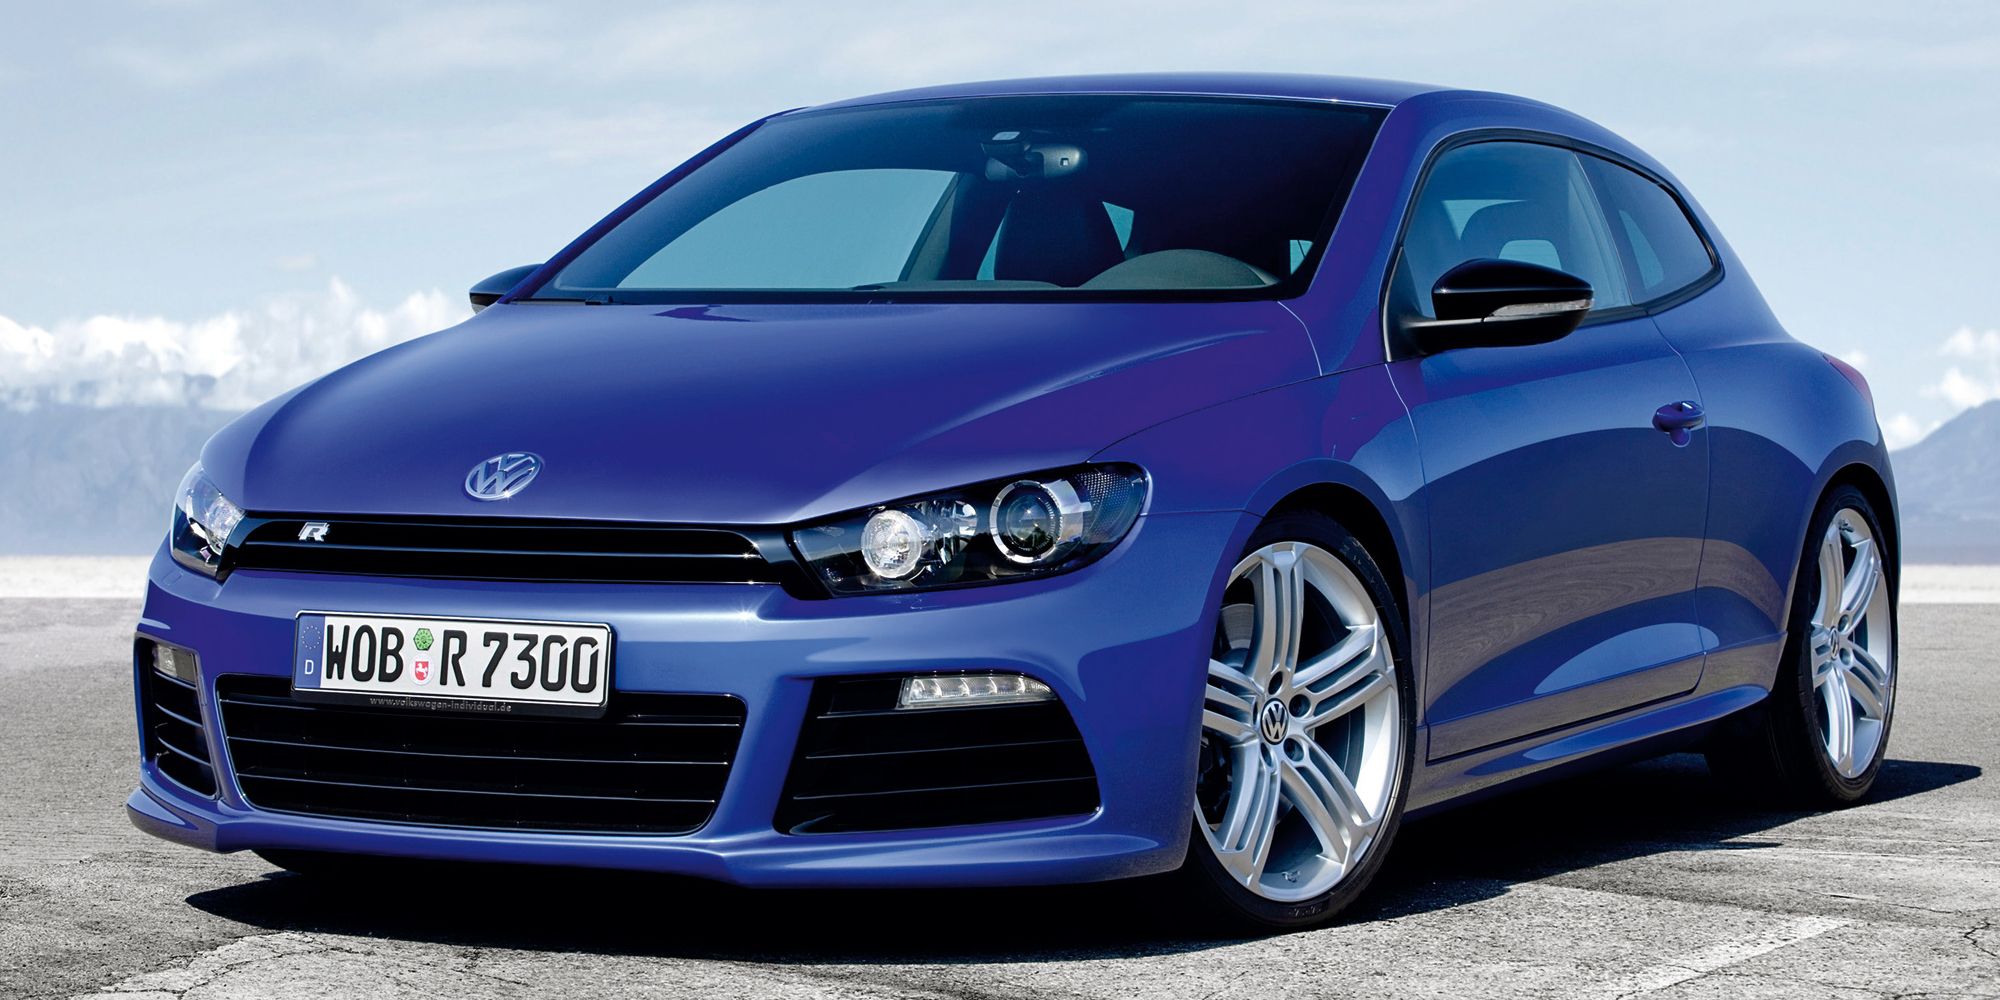 The front of the Scirocco R